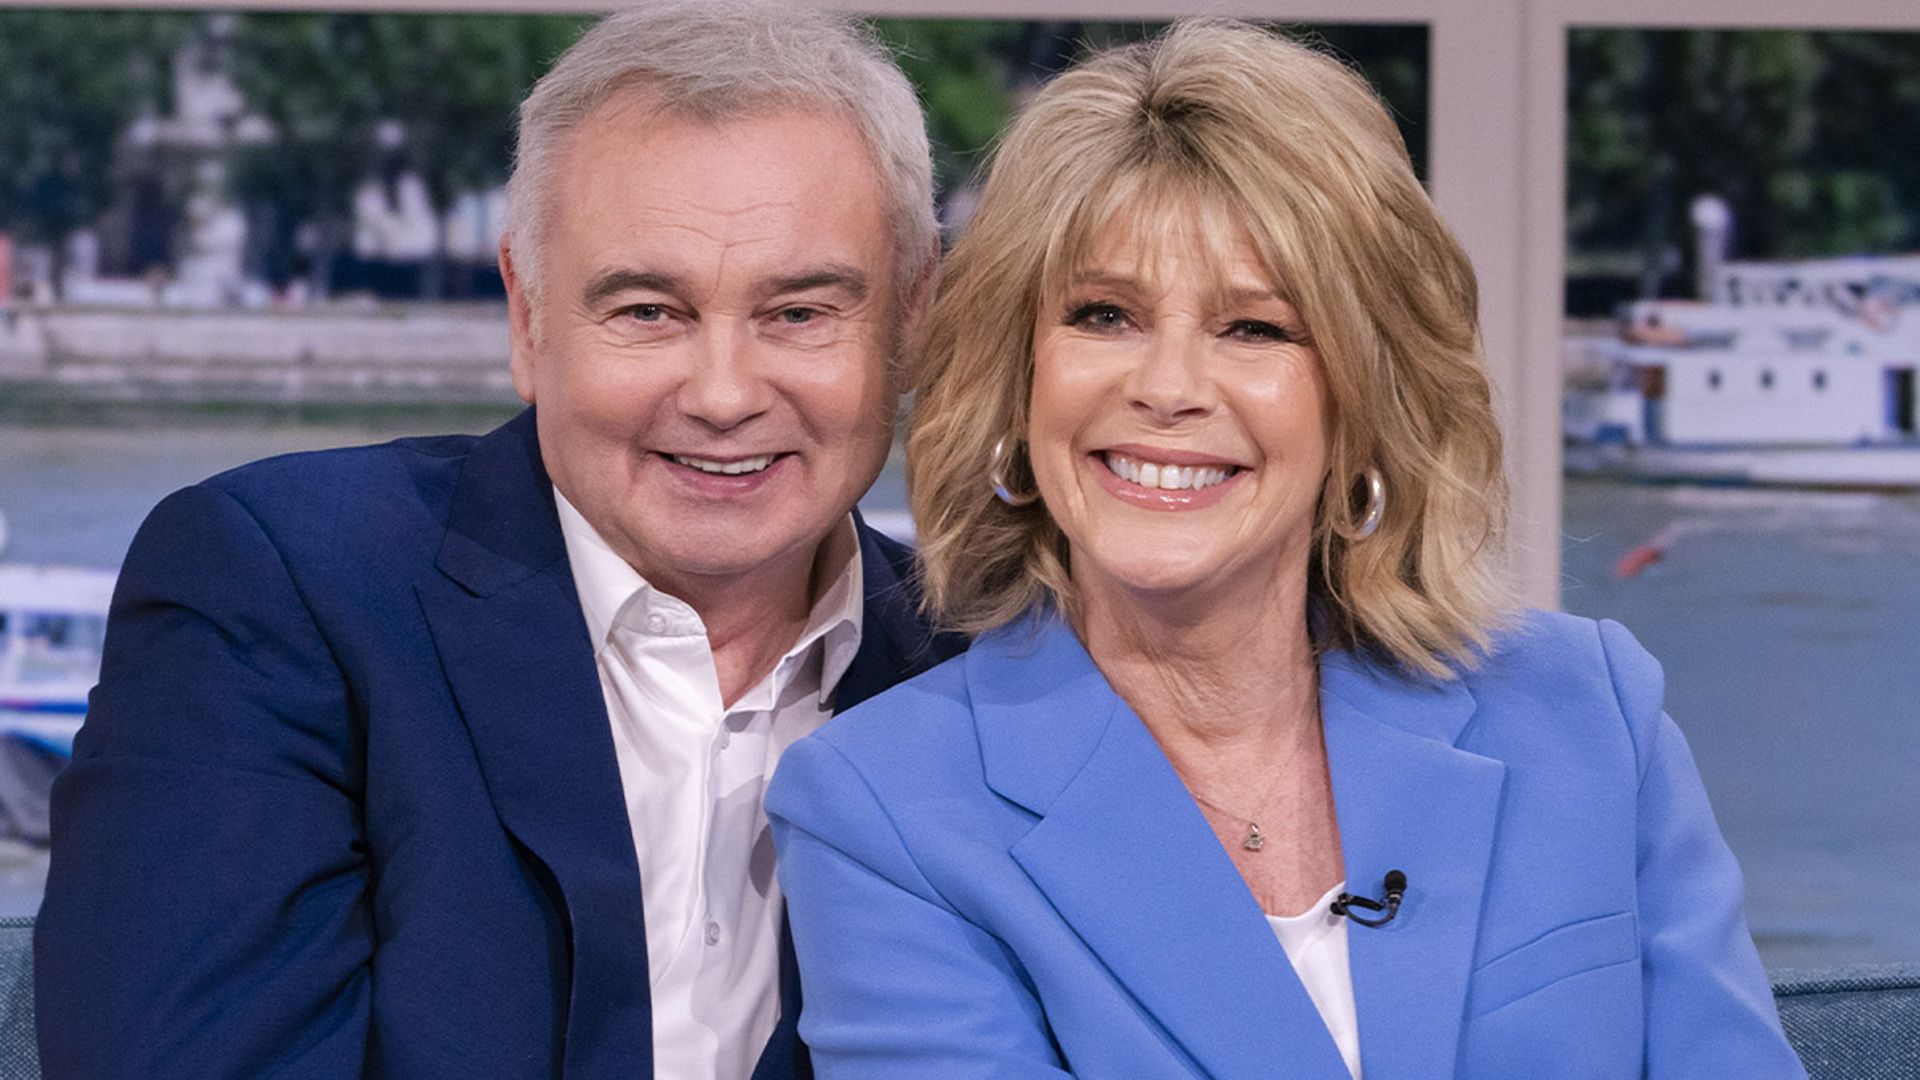 Ruth Langsford and Eamonn Holmes' bedroom glow up will amaze you